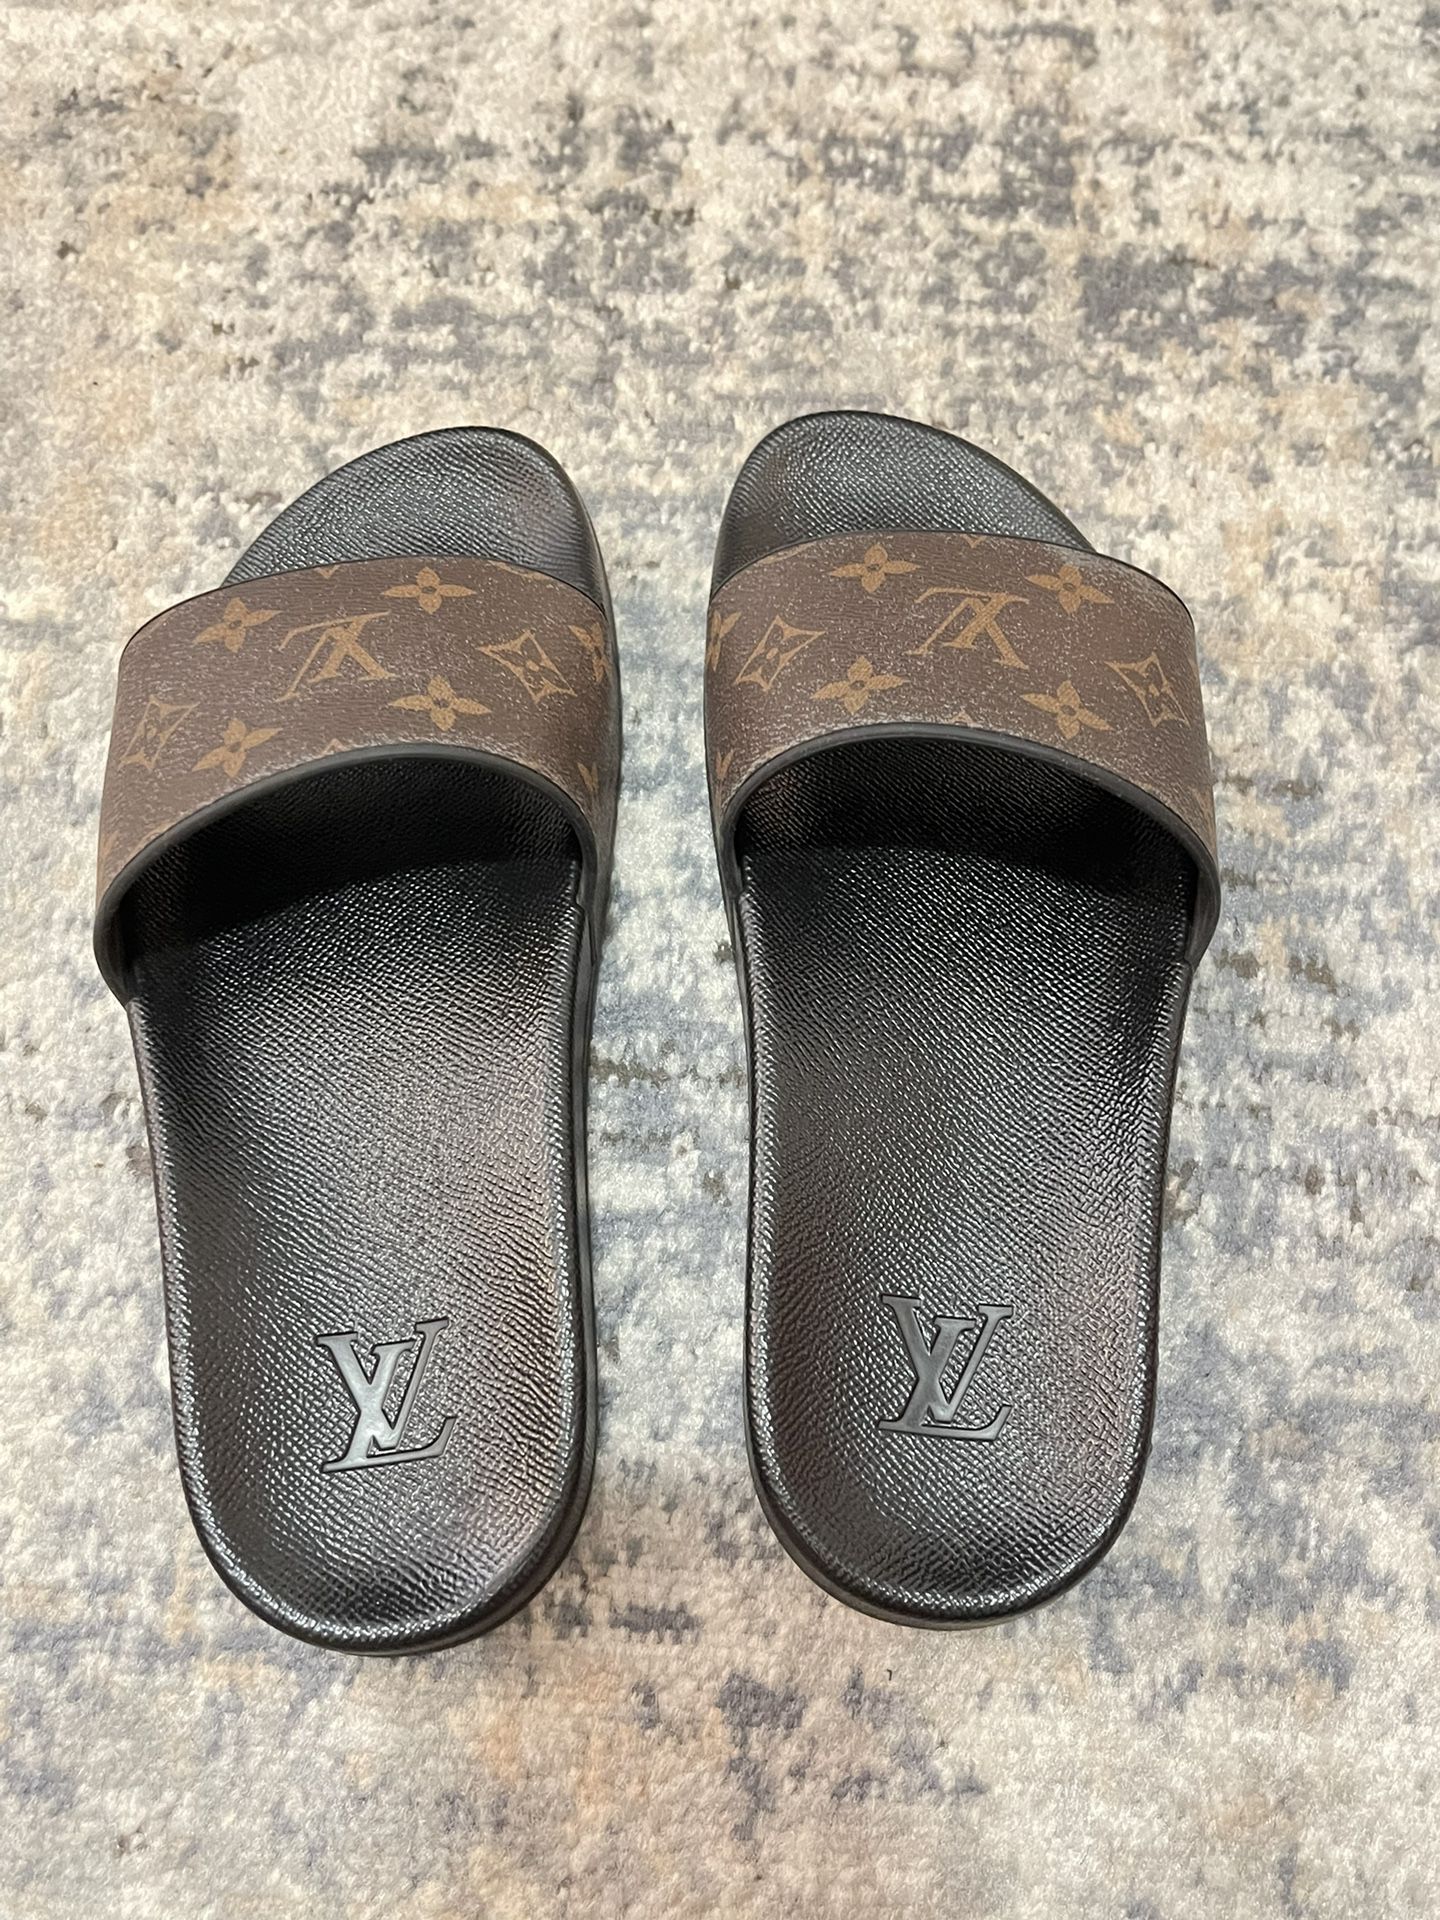 Louis Vuitton Waterfront Mule for Sale in Great Nck Plz, NY - OfferUp